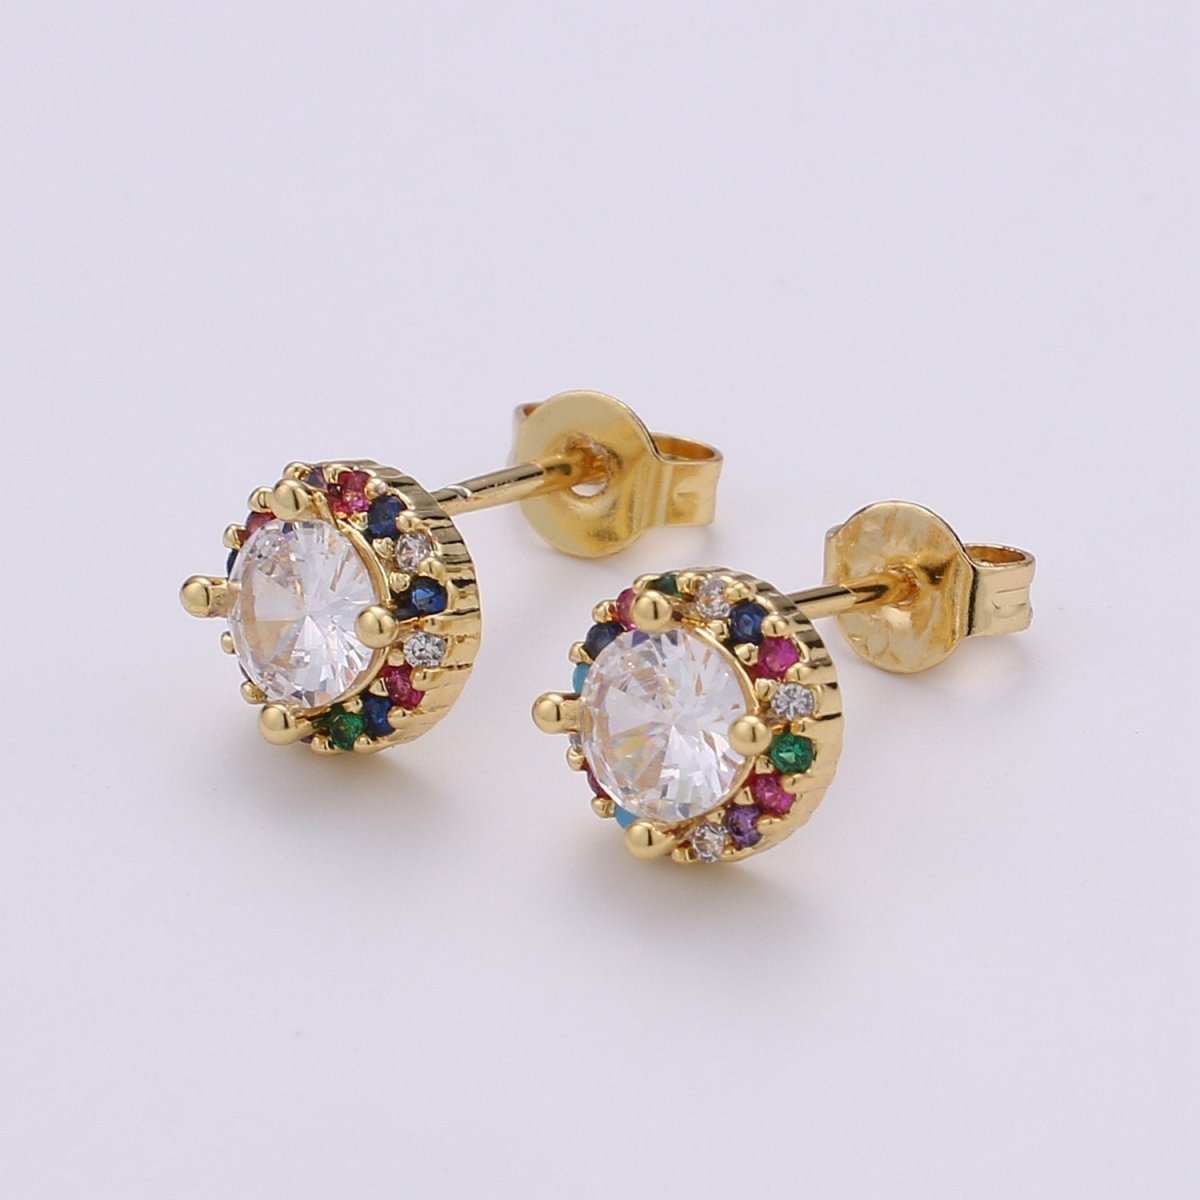 Gold Tiny Stud Earrings - Rainbow Micro Pave Studs - Dainty CZ Studs -5mm Round Crystal Small Stud Earrings - DLUXCA